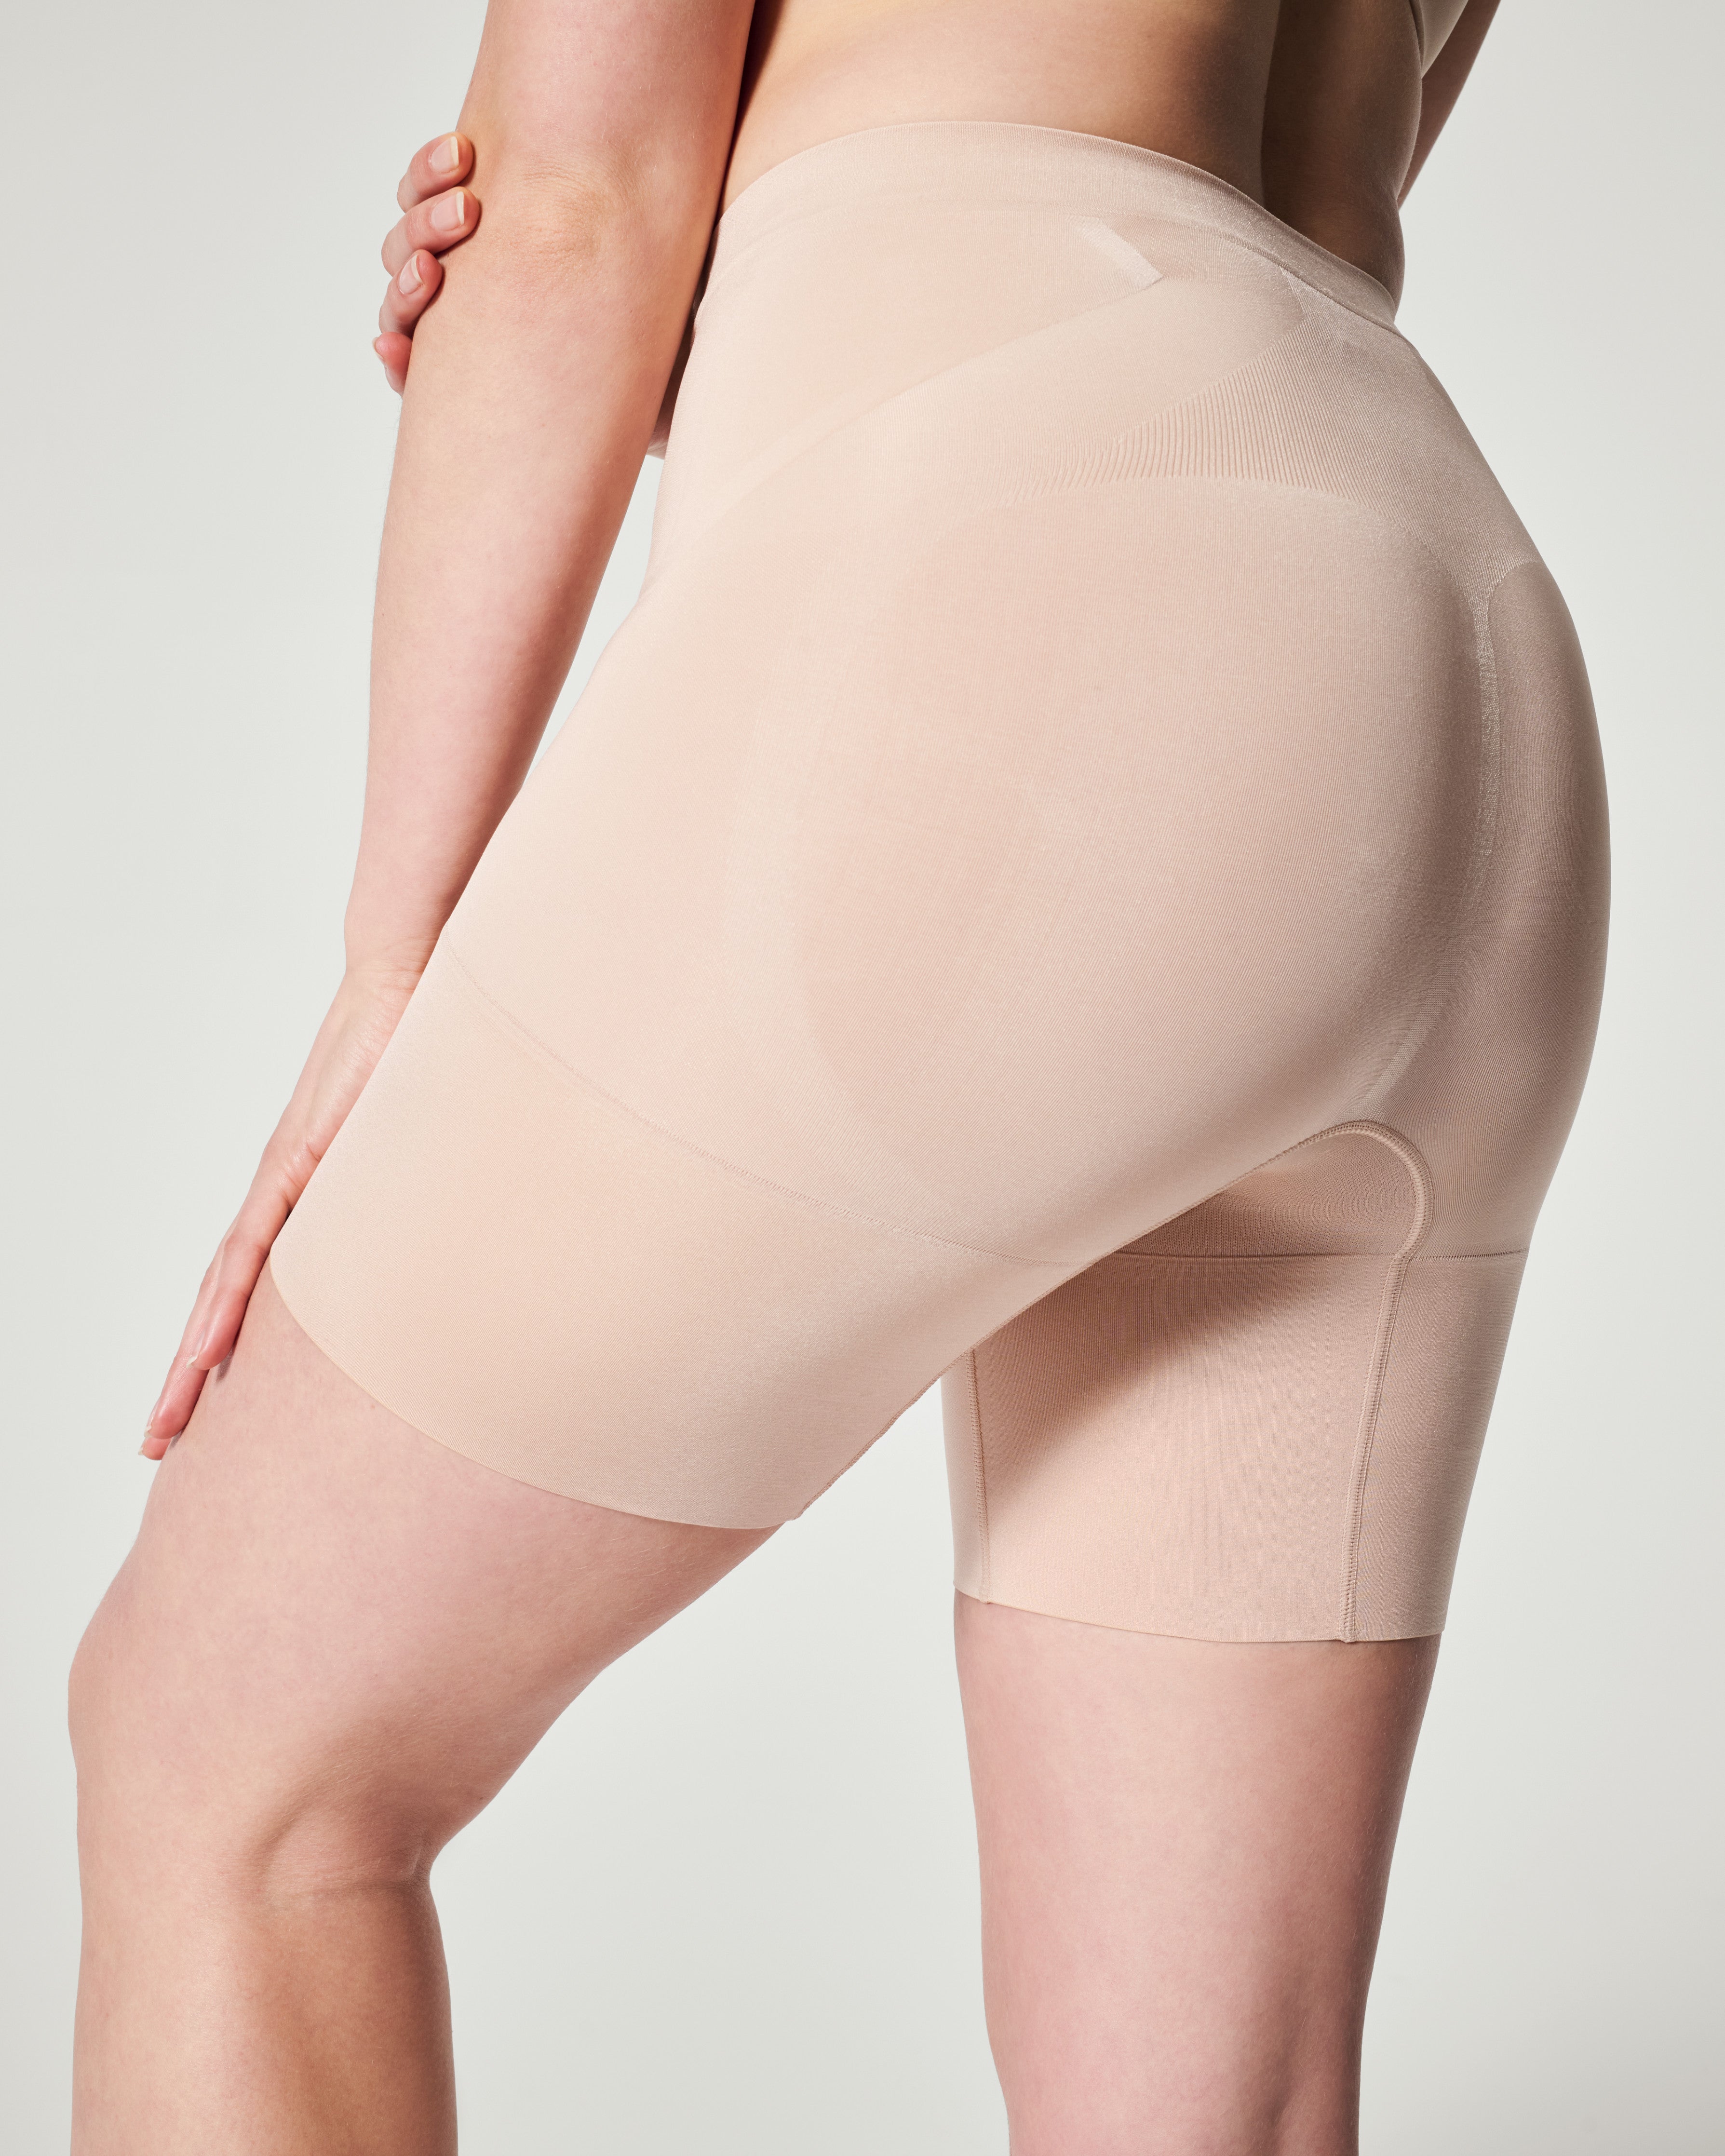 Spanx ✨ ASSETS by Women's Remarkable Results Mid-Thigh Shaper